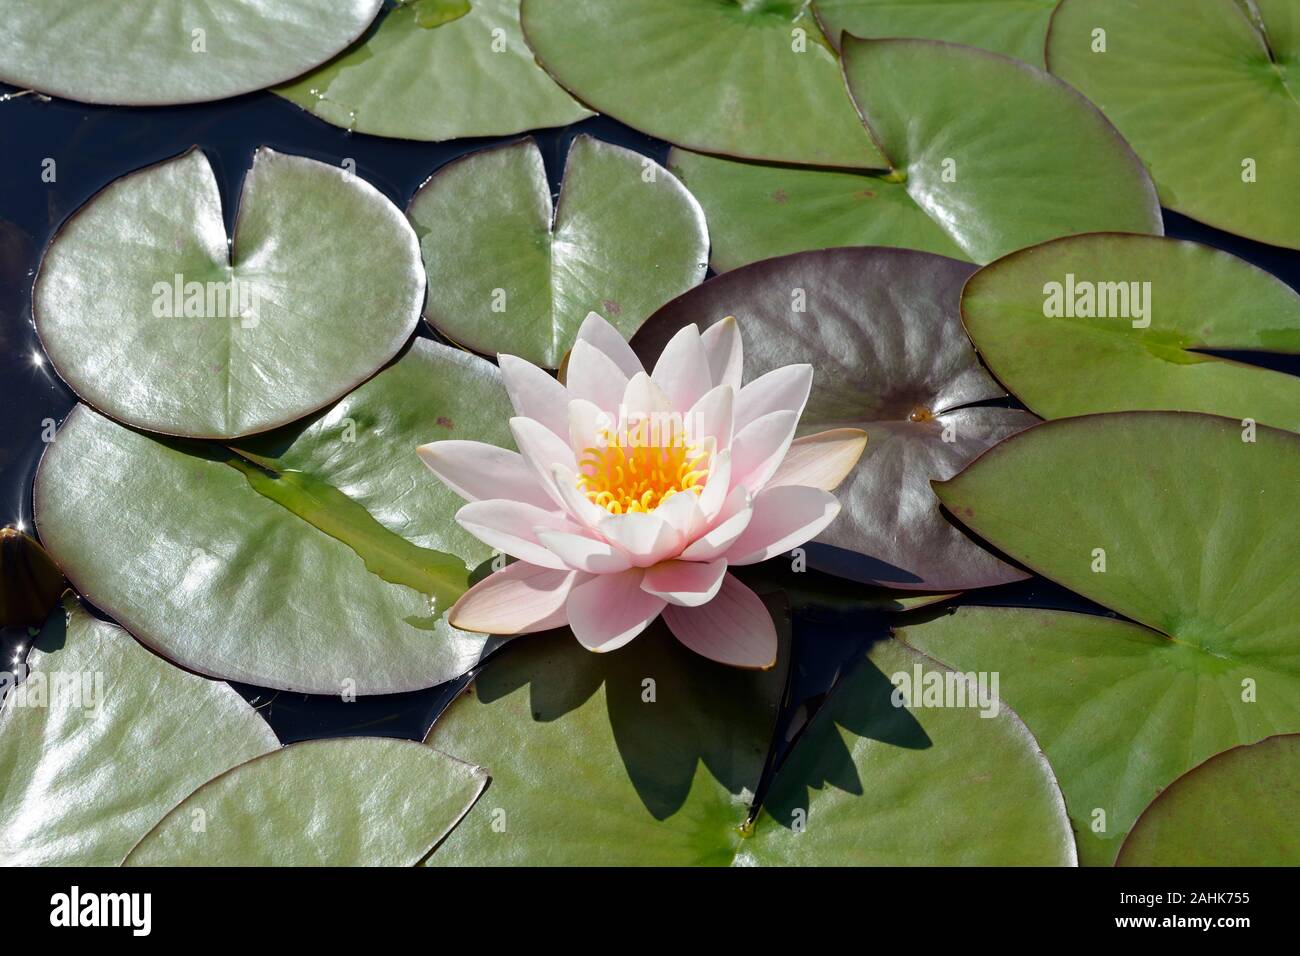 Nymphaea alba (European white water lily) is native to North Africa, temperate Asia, Europe and Tropical Asia. It is an aquatic plant of fresh water. Stock Photo